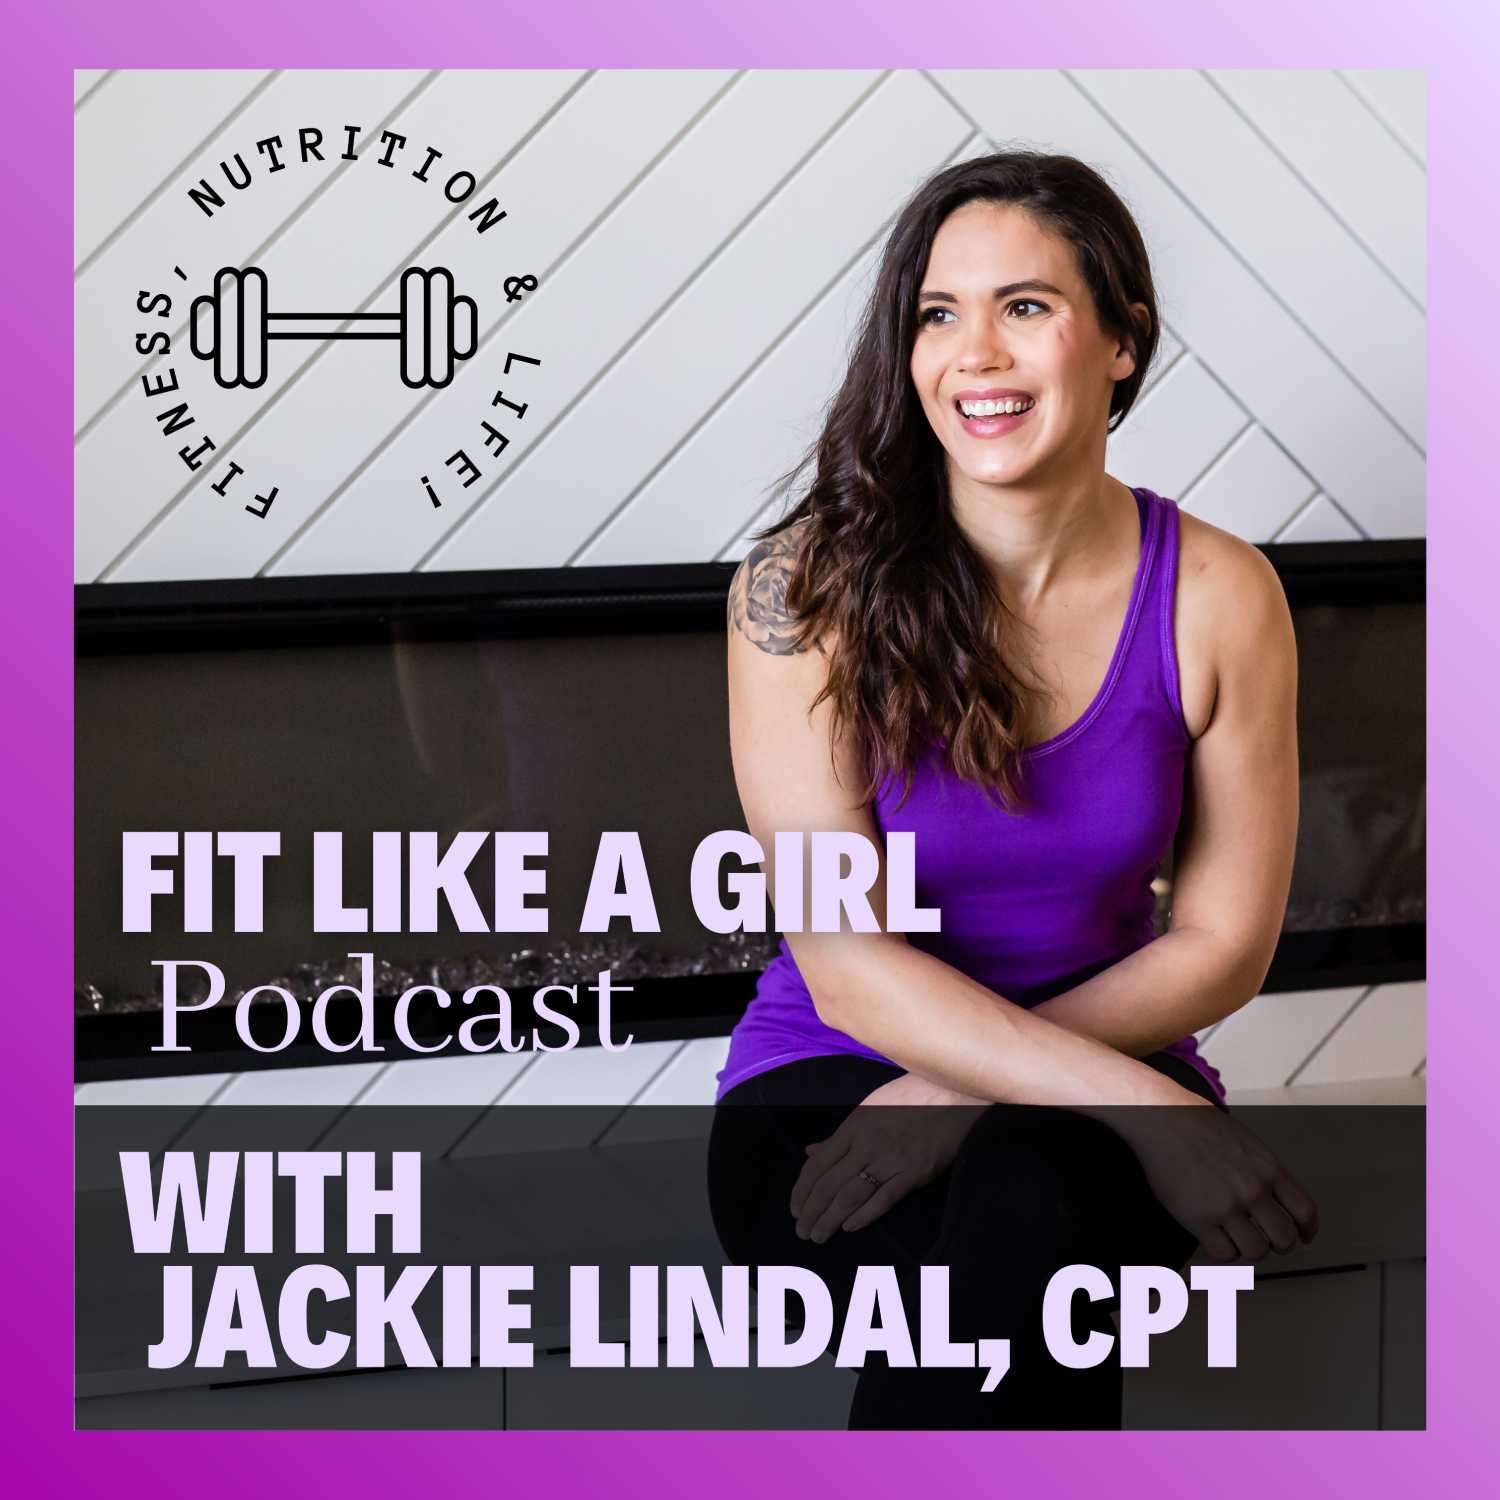 Episode #27: 5 things to STOP doing to achieve your goals